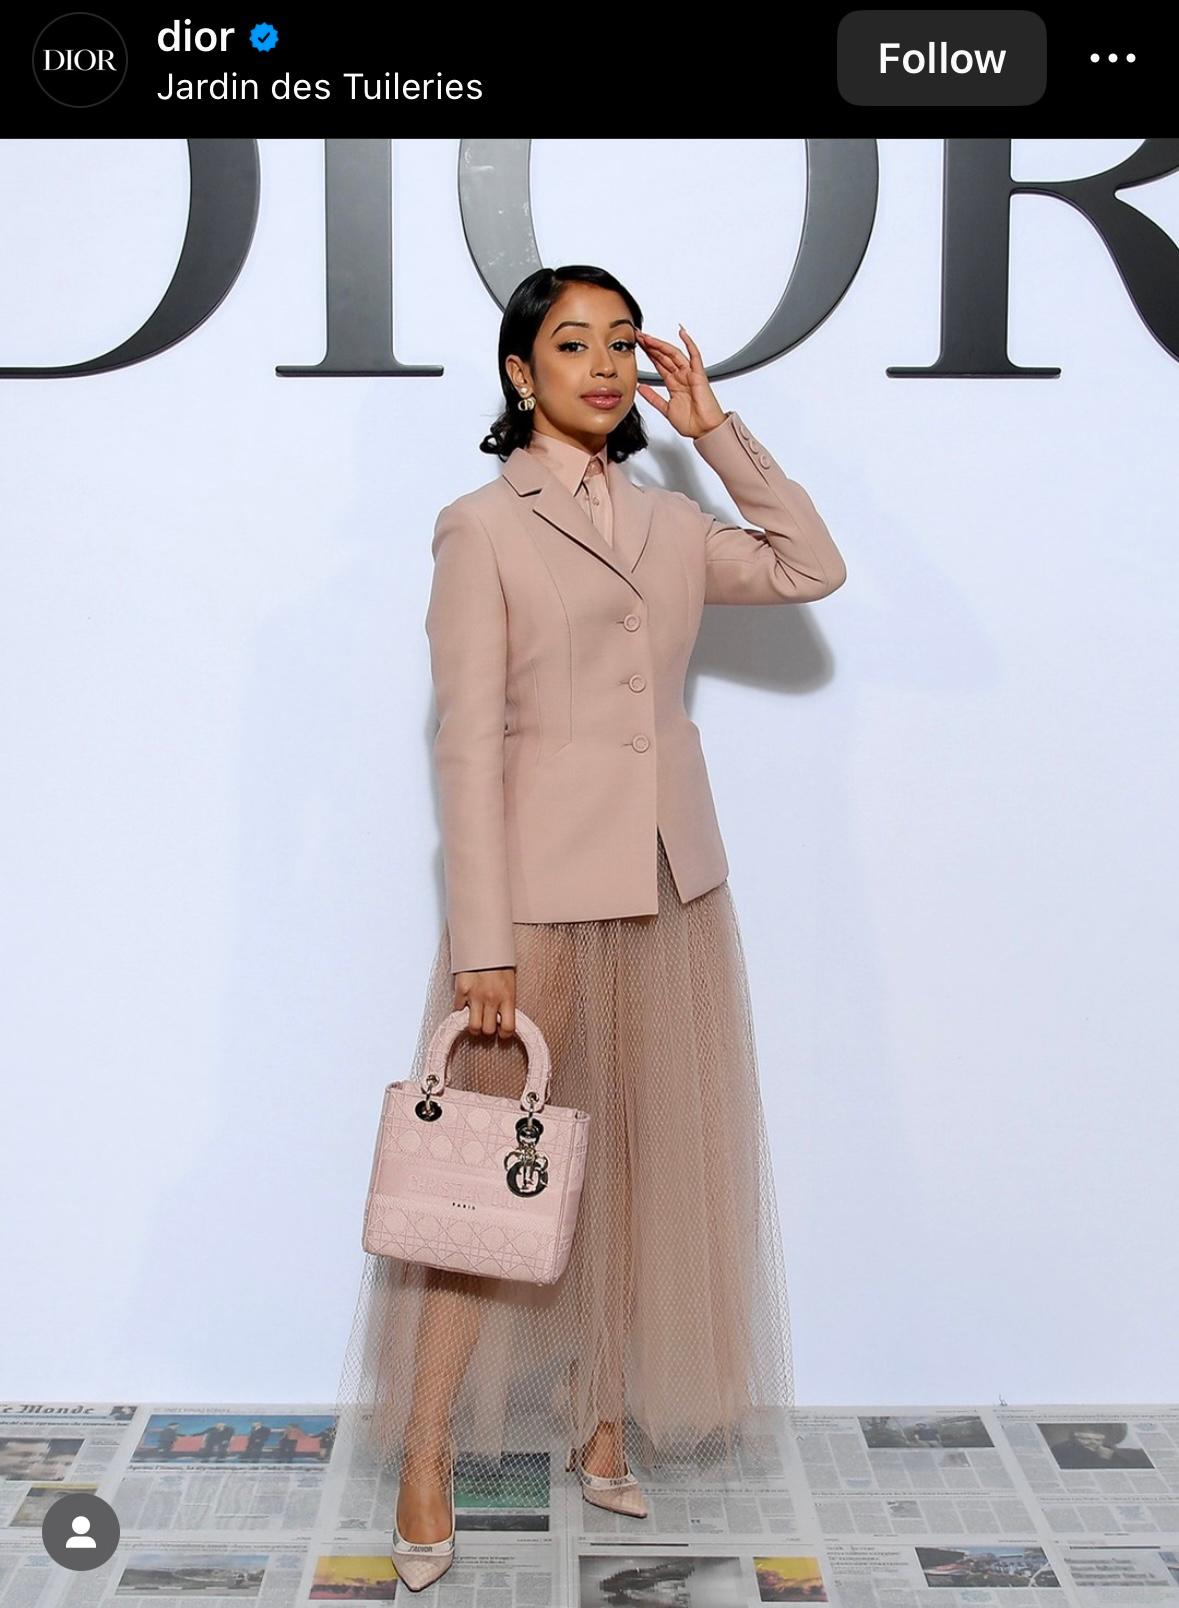 Dior's iconic Bar Jacket, originally created by Christian Dior in 1947, is reimagined in a delicate powdery pink color by Maria Grazia Chiuri. Crafted from a blend of Rose des Vents wool and silk, it features a notched collar and welt pockets,